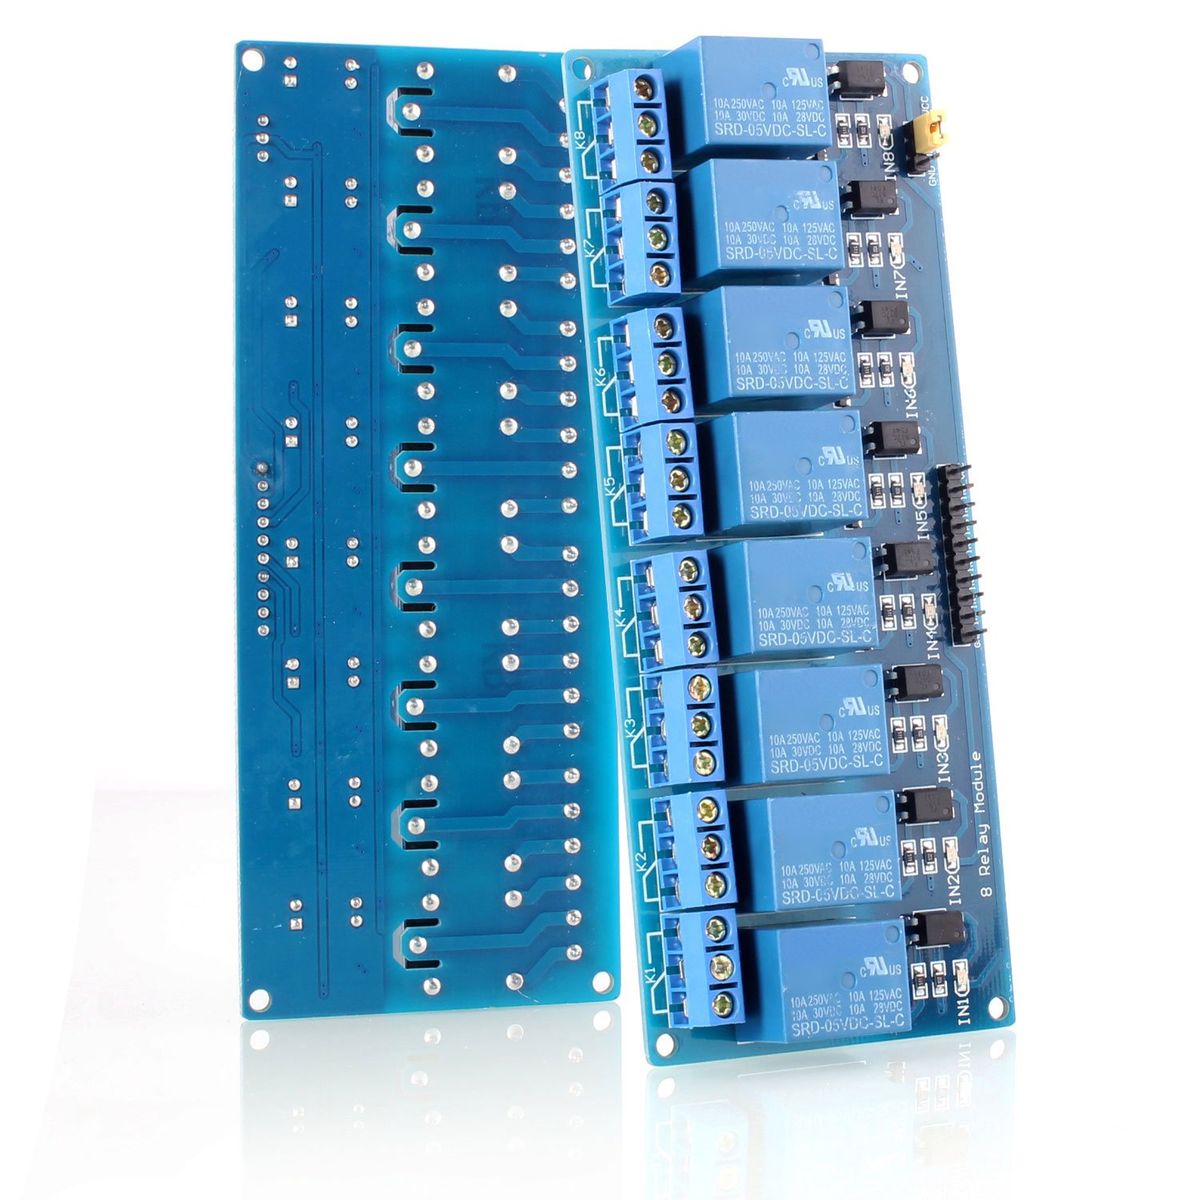 Neuftech 8-CH 5V 8-channel relay module board for Arduino PIC DSP AVR ARM relay module